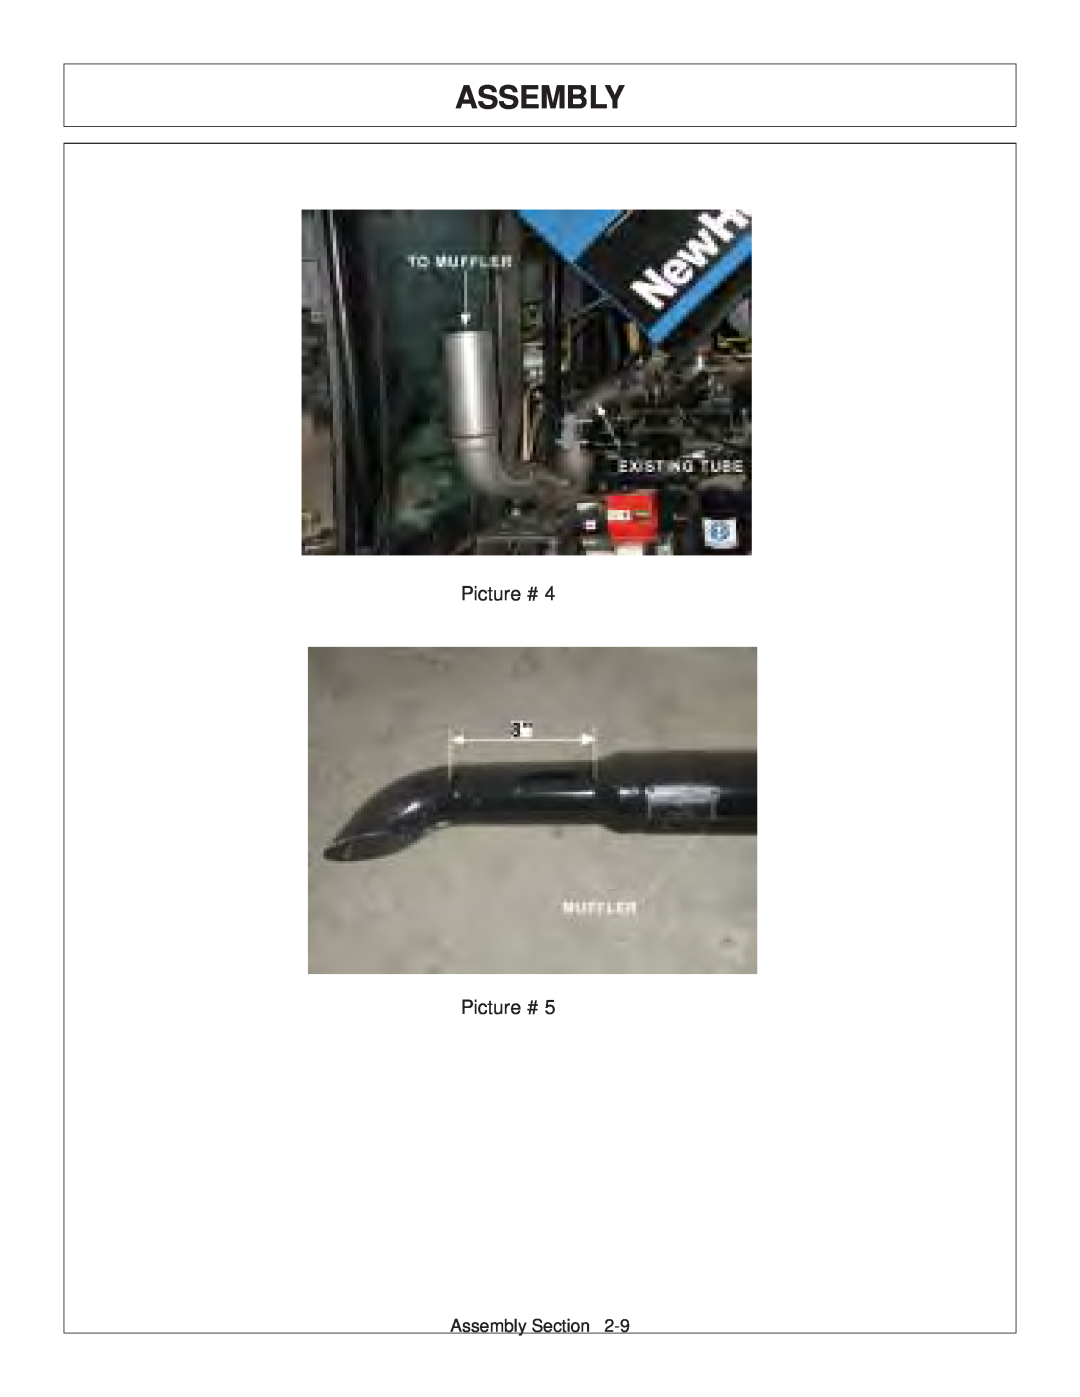 Tiger Products Co., Ltd 6020009 manual Assembly, Picture # Picture # 